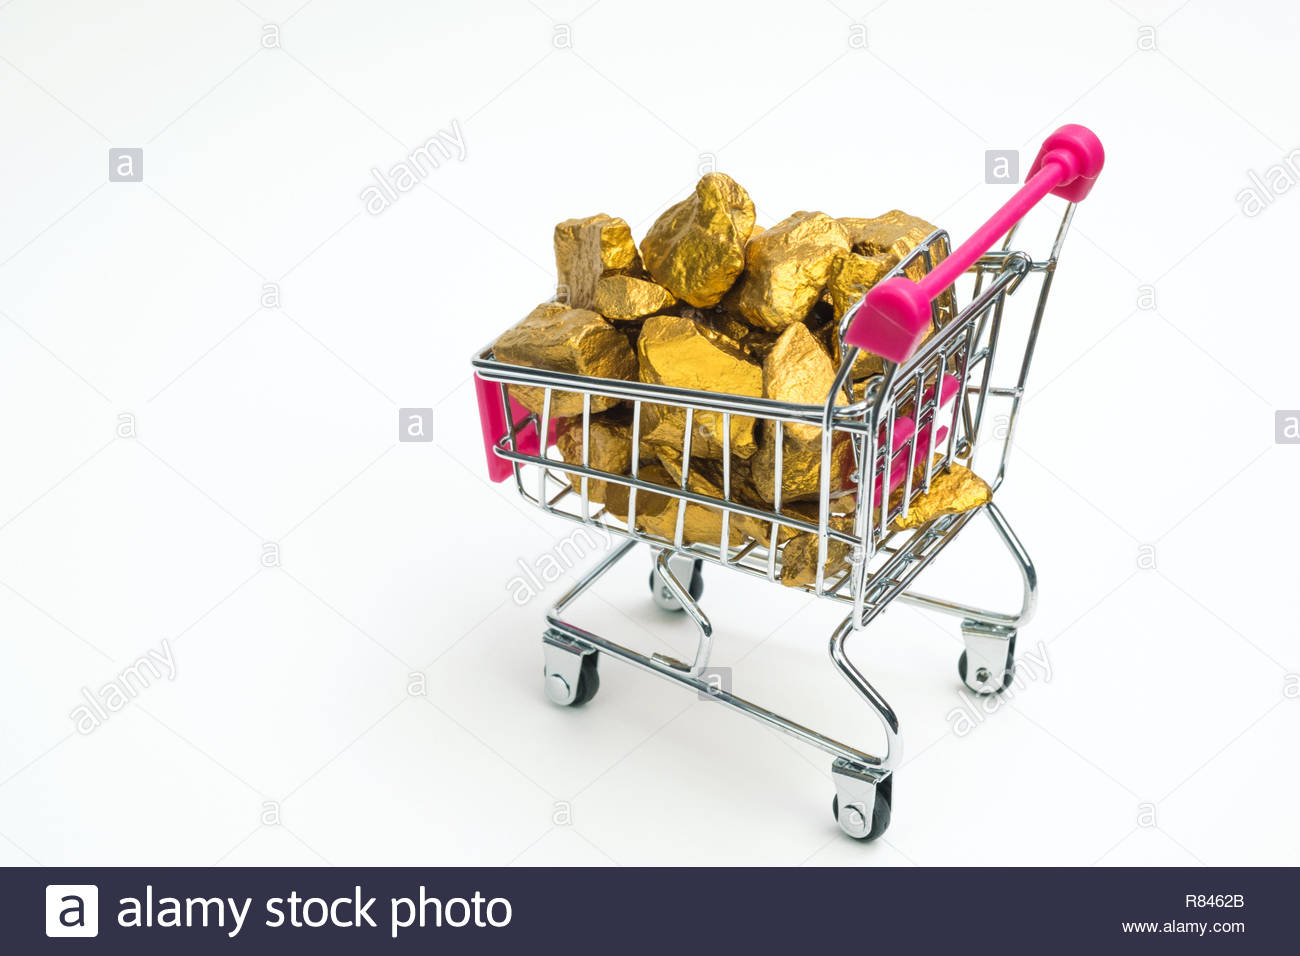 Pile Of Gold Nuggets Or Ore In Shopping Cart Supermarket